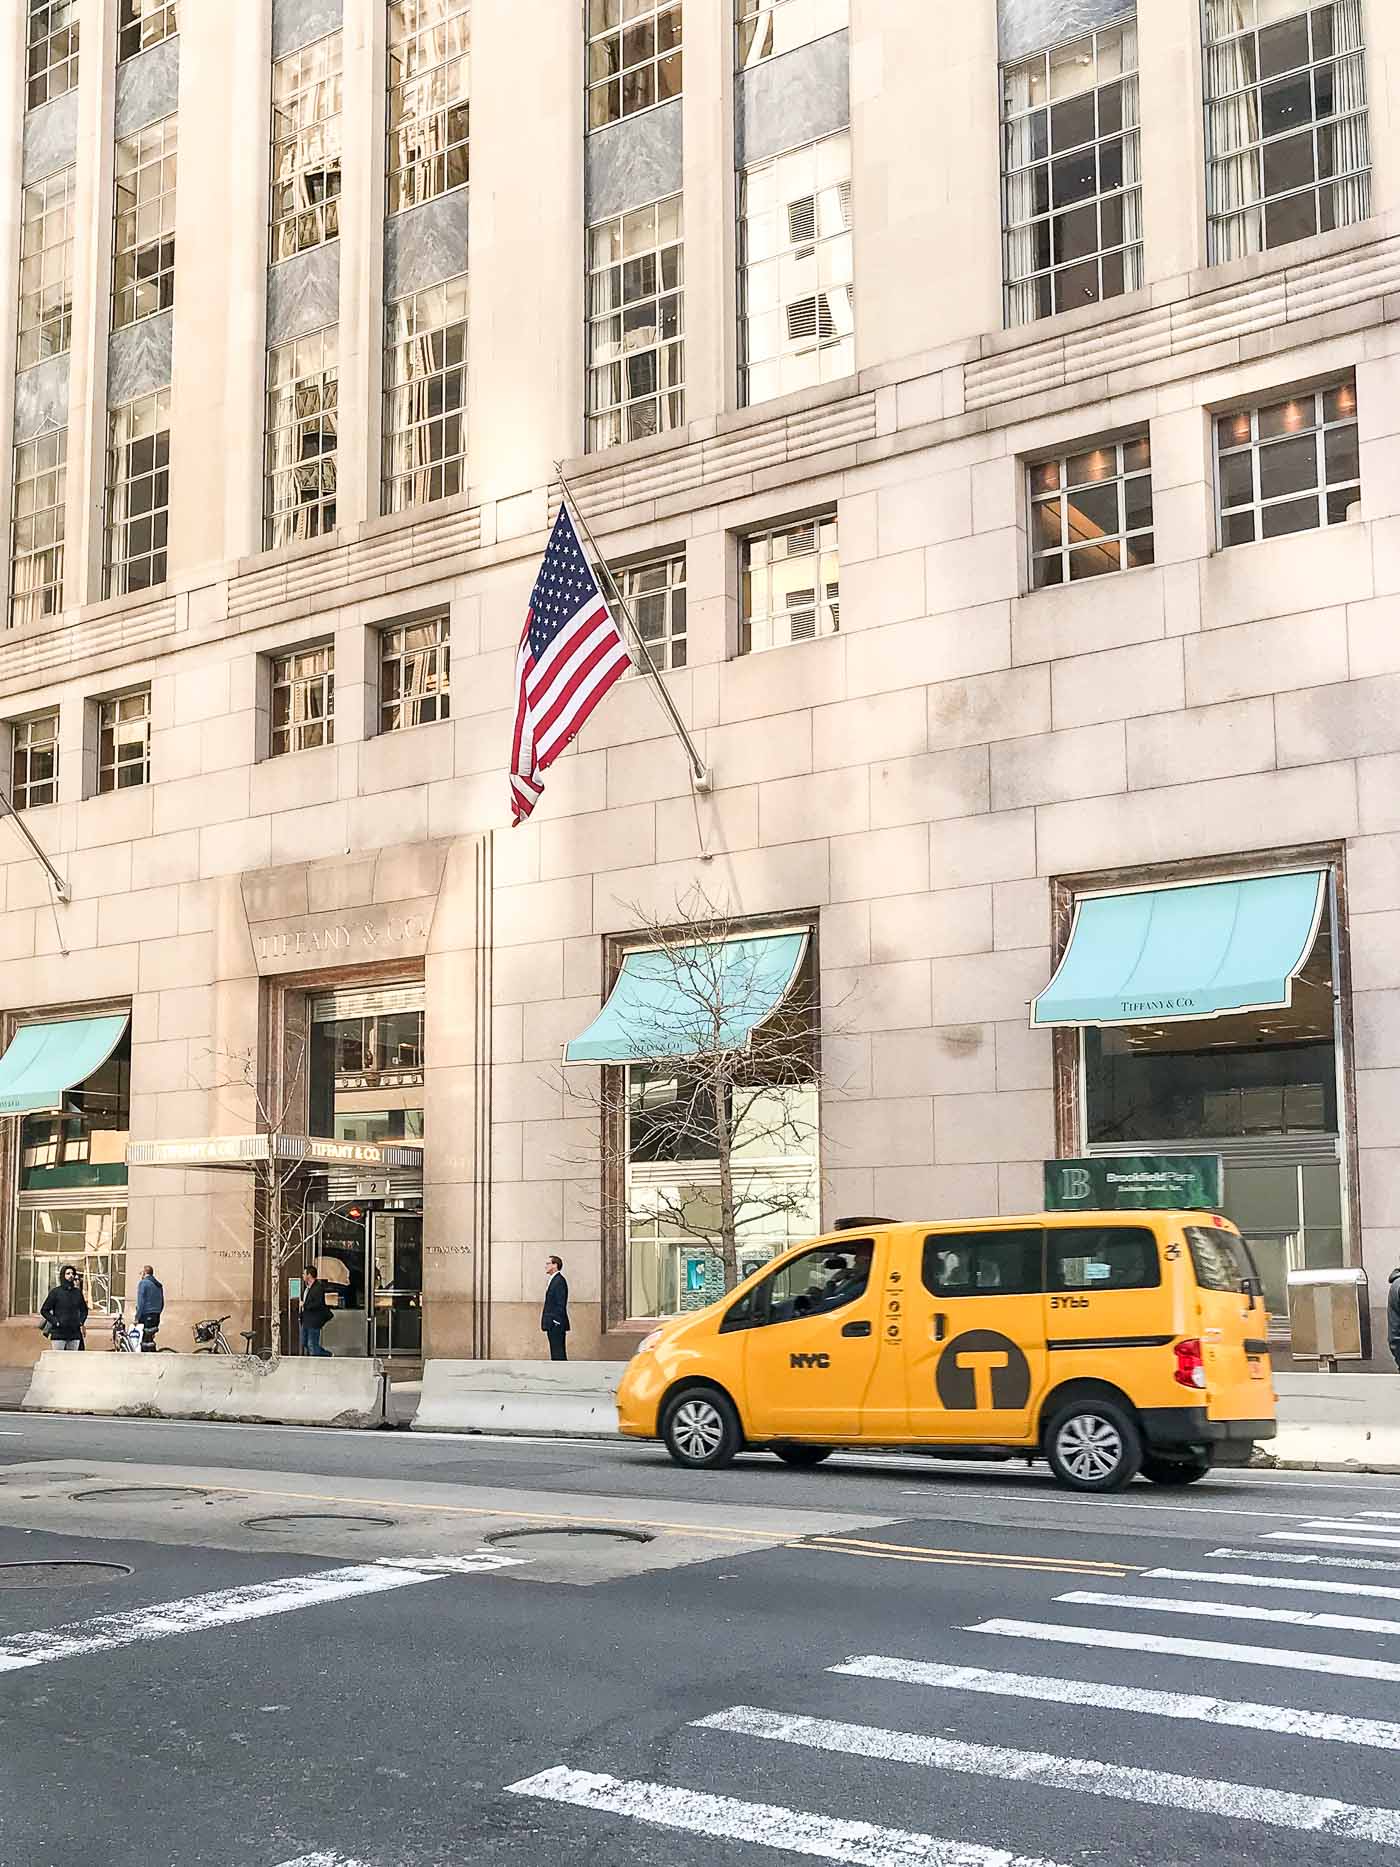 Tiffany and Co on 5th Avenue in New York City